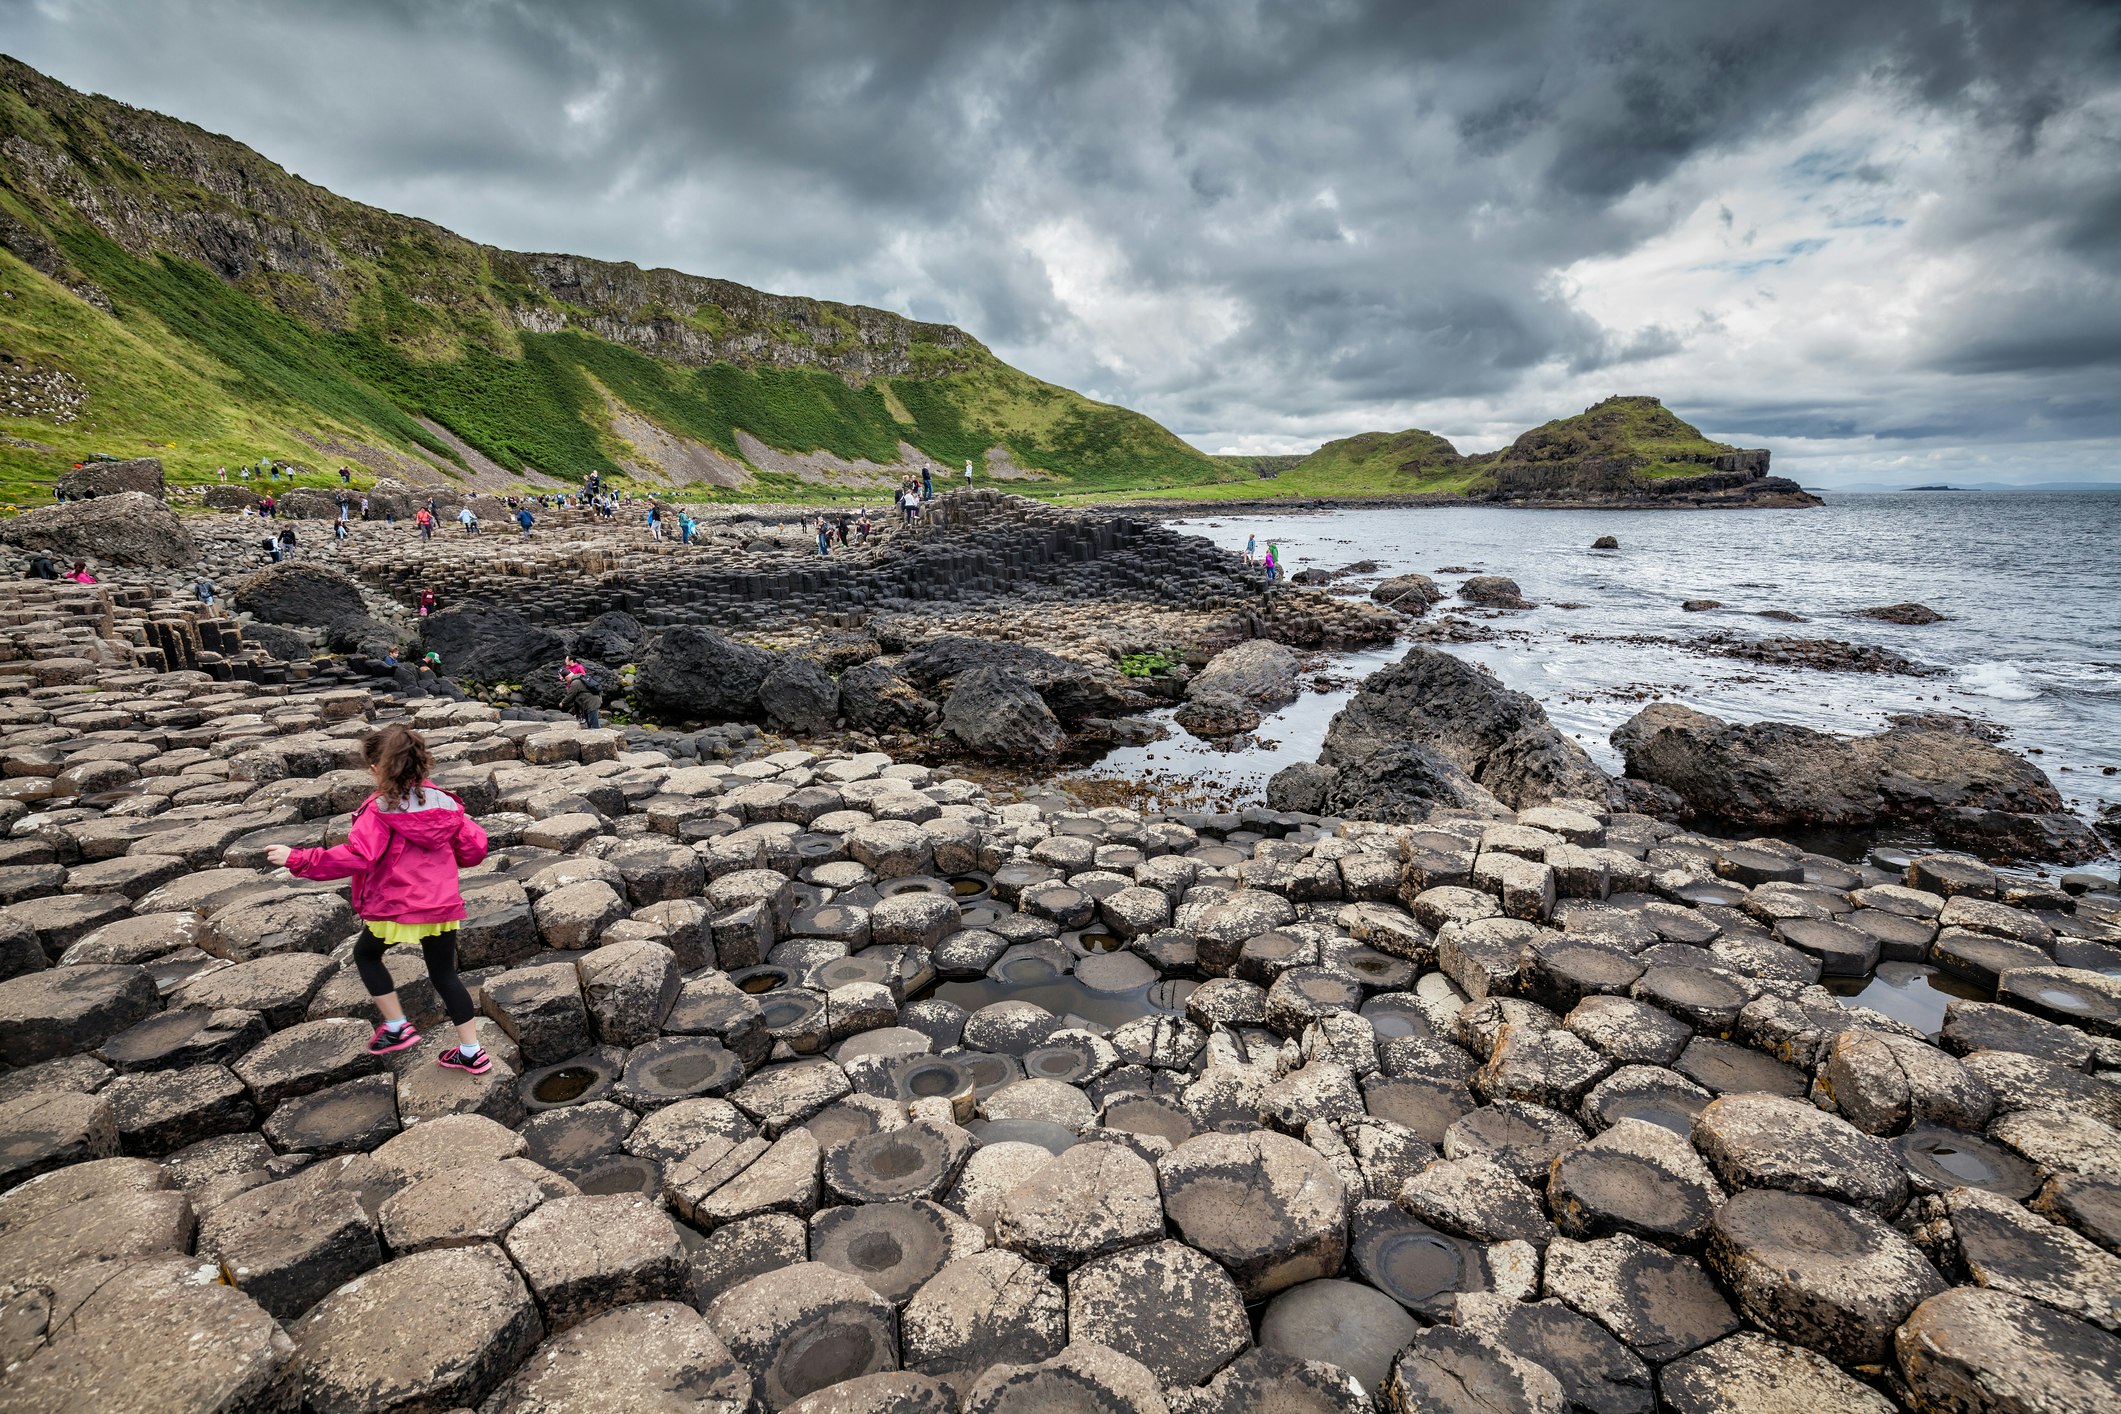 A girl with a pink jacket walks alone through the basalt columns of the Giant’s Causeway, County Antrim, Northern Ireland, United Kingdom